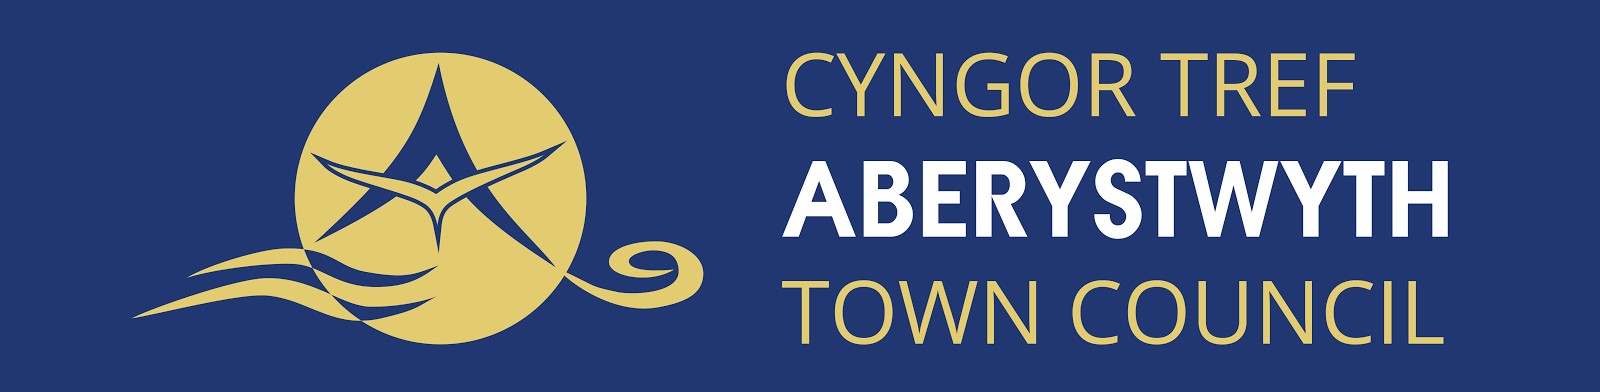 The New Logo for Aberystwyth Town Council